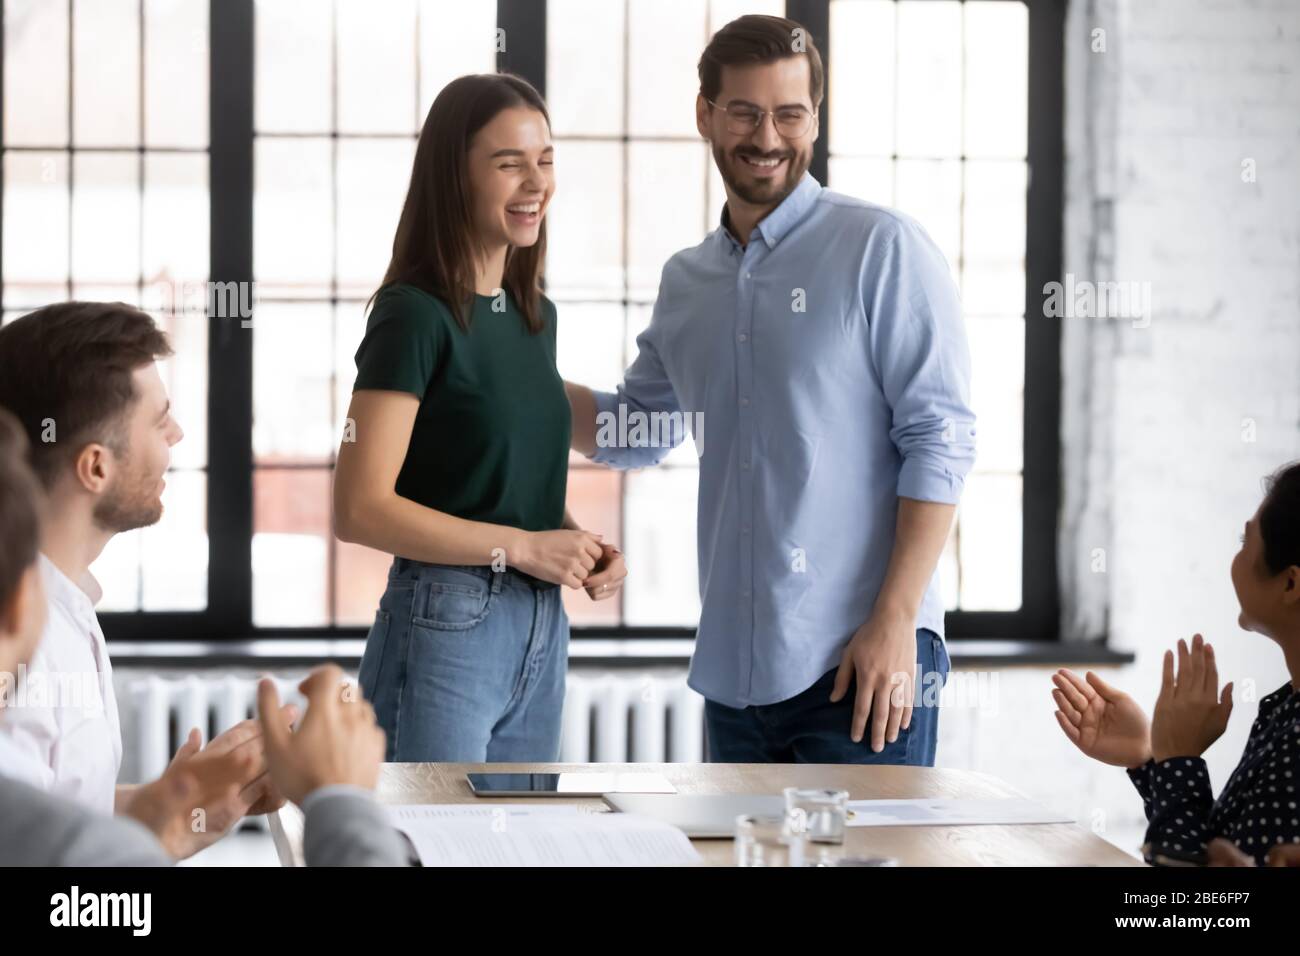 Male employer introduce new excited female employee at meeting Stock Photo